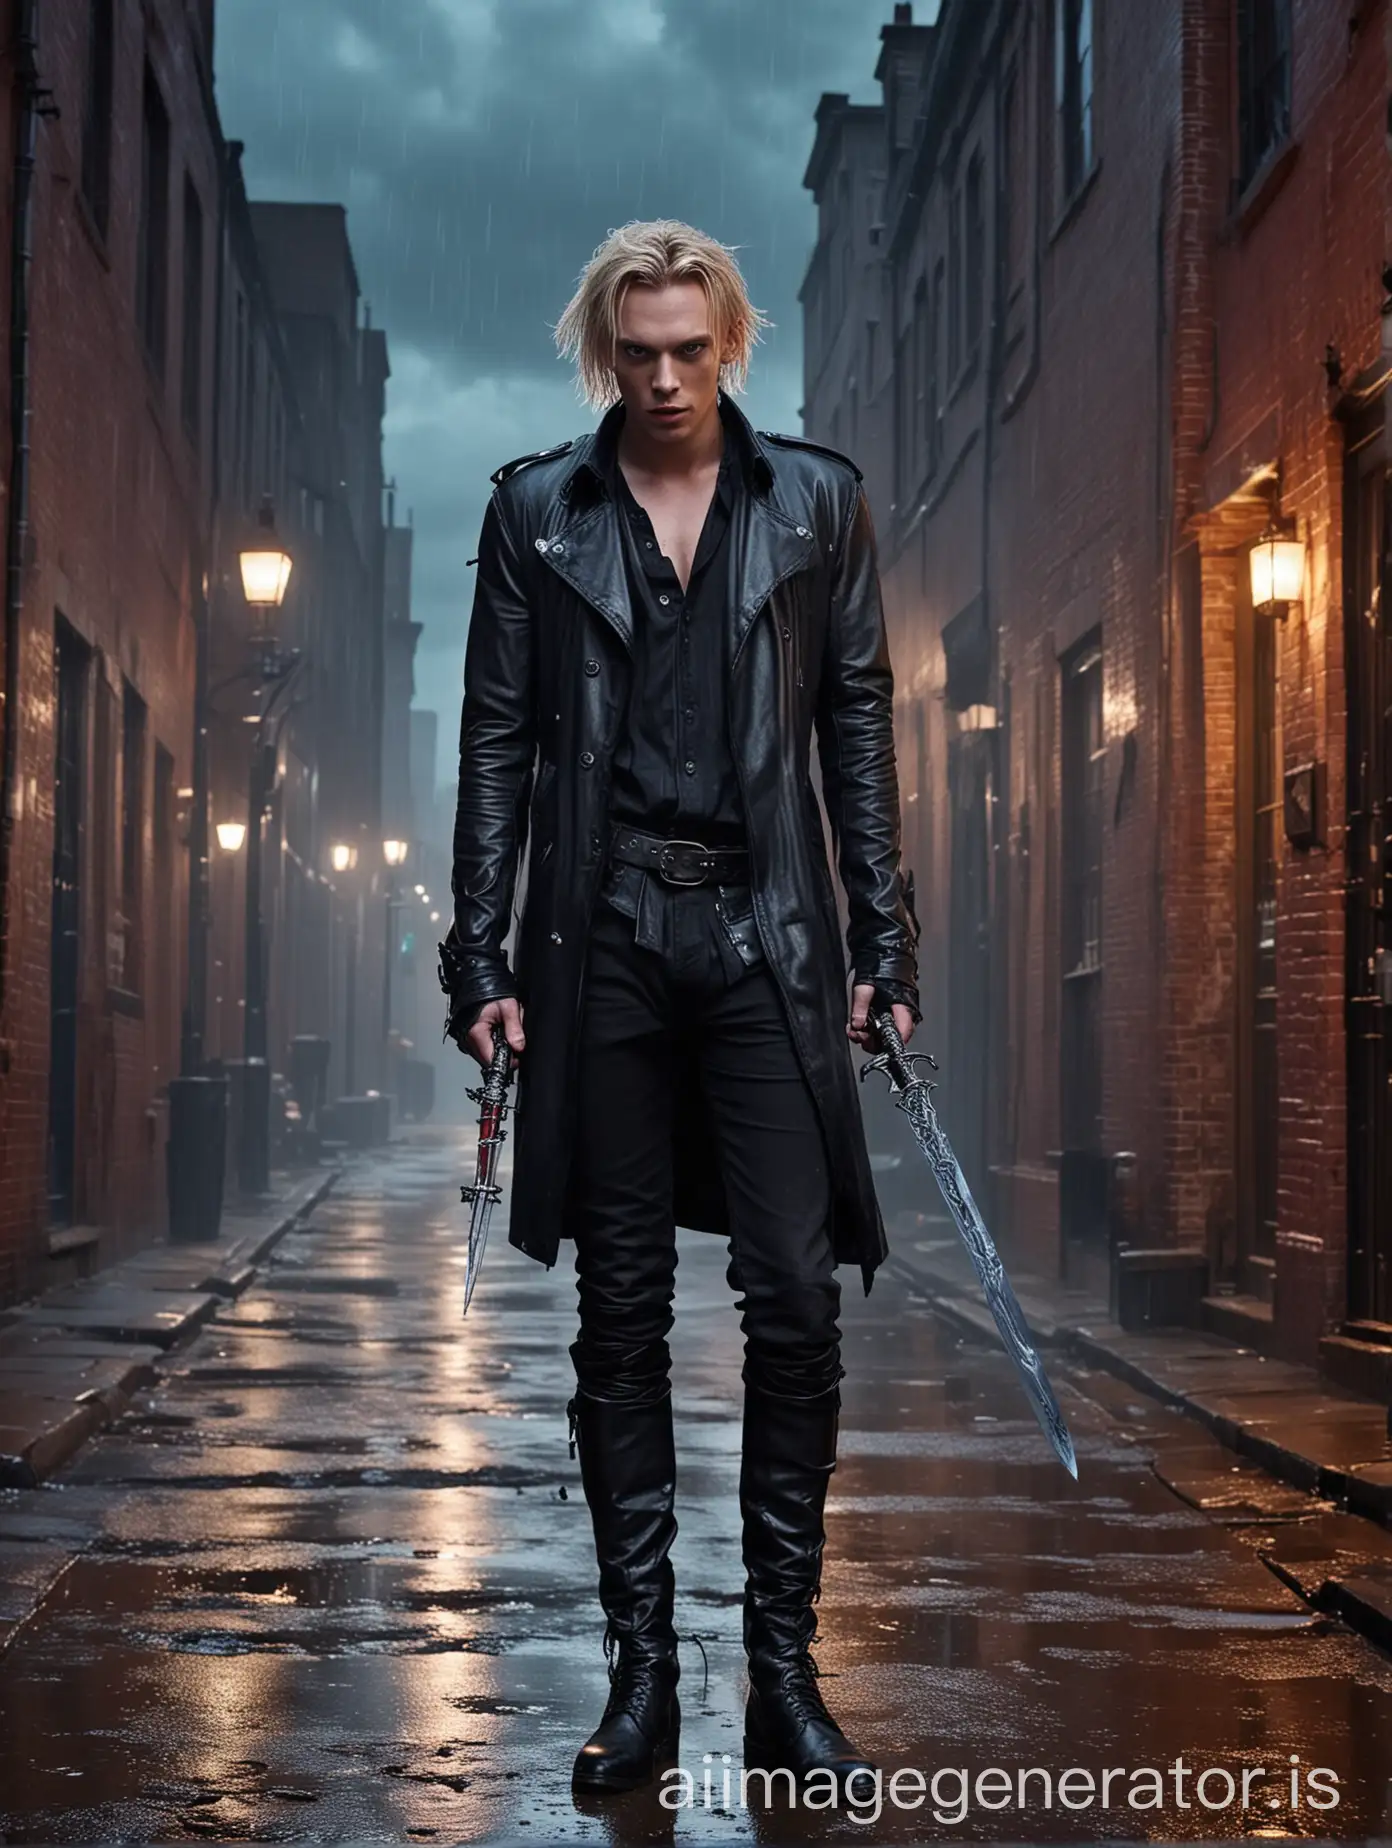 Jamie Campbell Bower face, beautiful blue eyes, platinum blonde hair, mischevious face, wearing leather, unbuttoned shirt, city neon nightlights, red brick buildings, standing in front, wearing black boots, tall man, holding a glowing glass dagger sword, stormy clouds, foggy background, wet brickroad